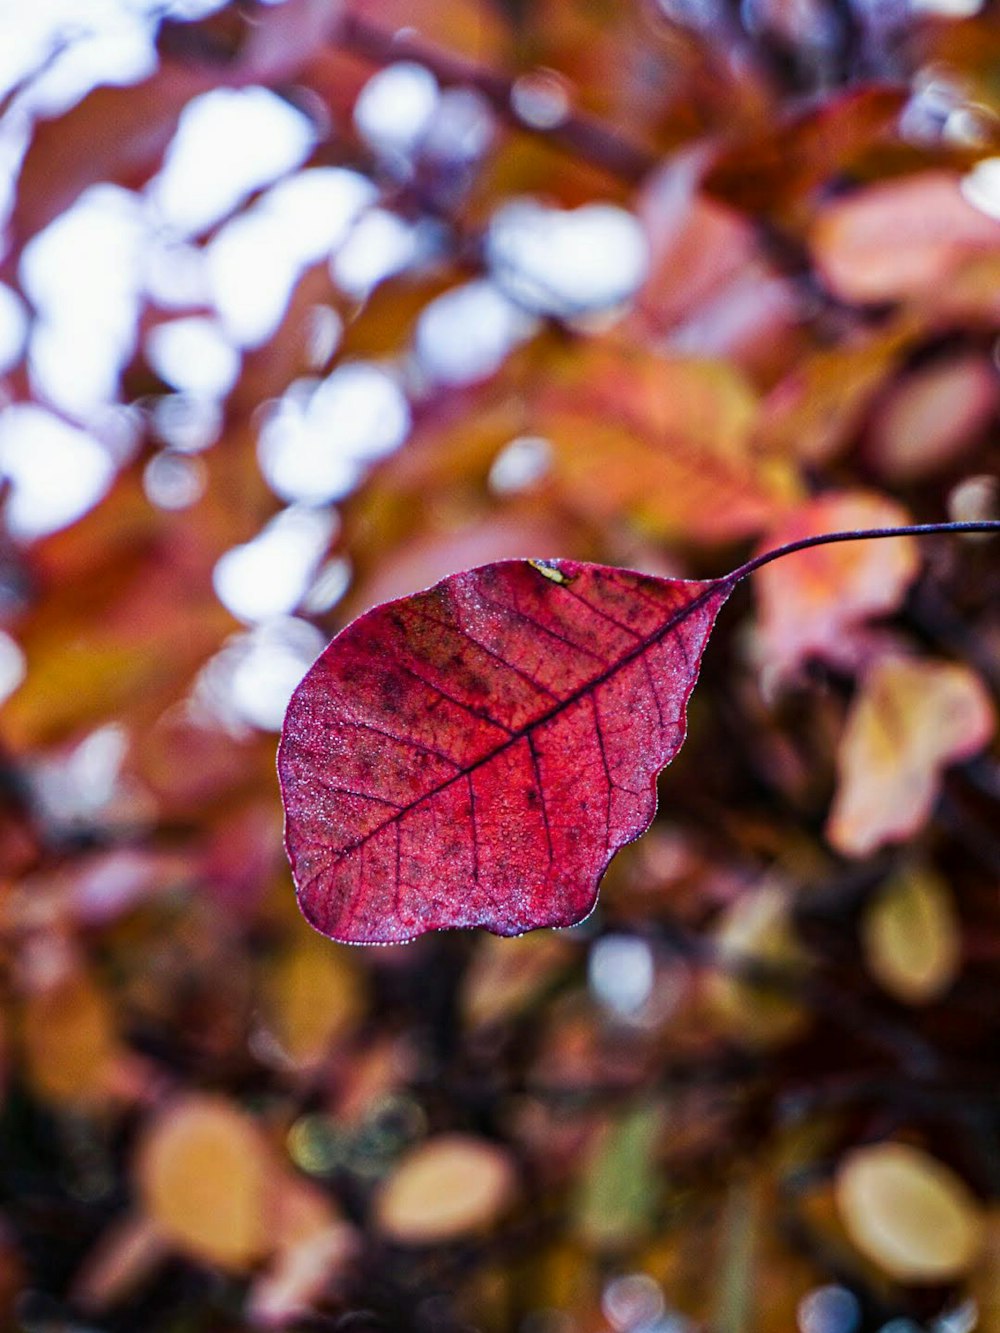 a red leaf hanging from a tree branch